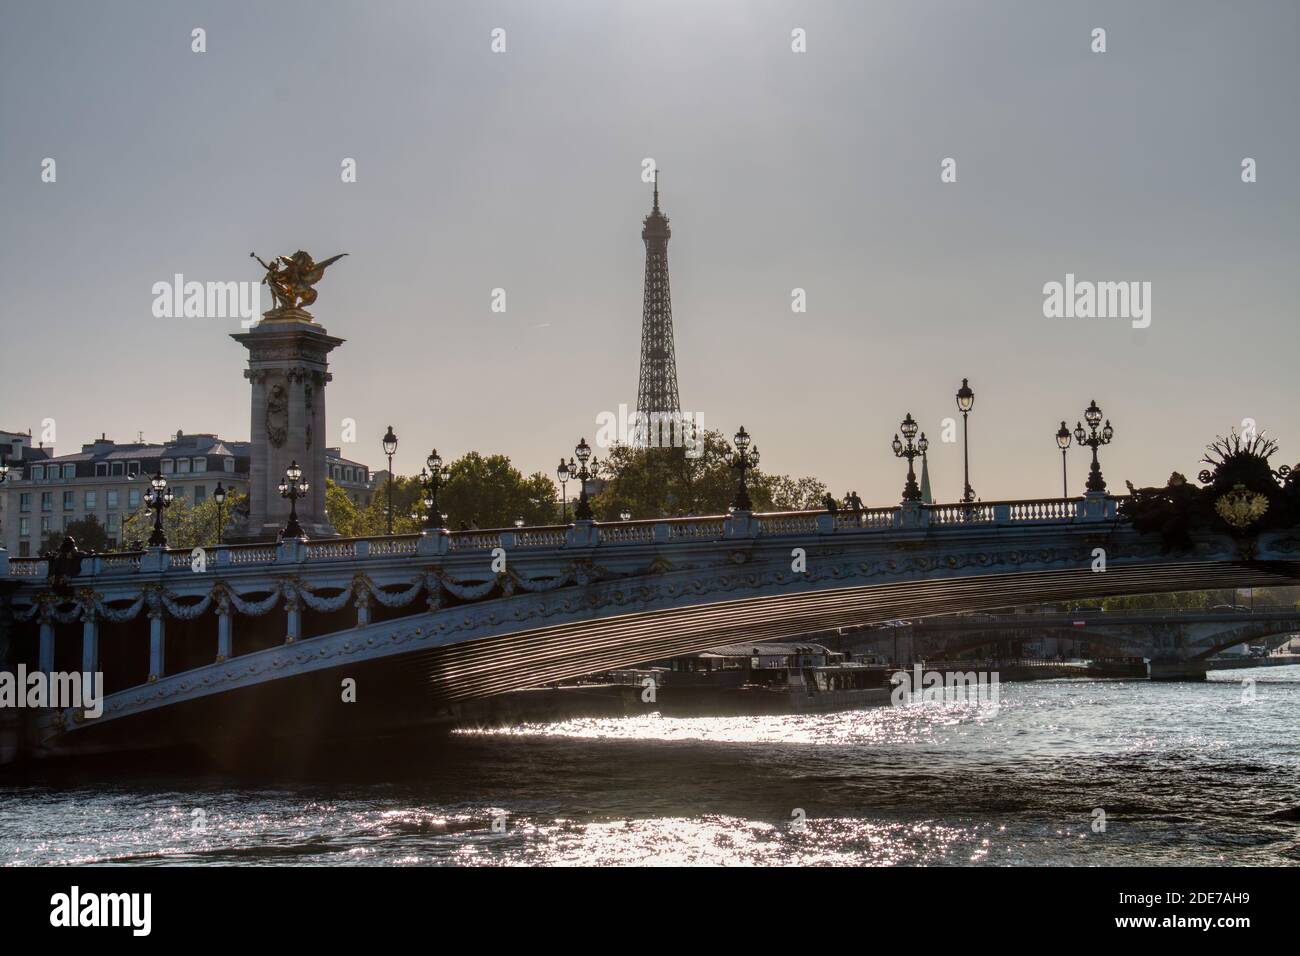 Nice landscape in Paris, France. Sunset at the Alexander III bridge over the Seine river and the Eiffel Tower in the background Stock Photo